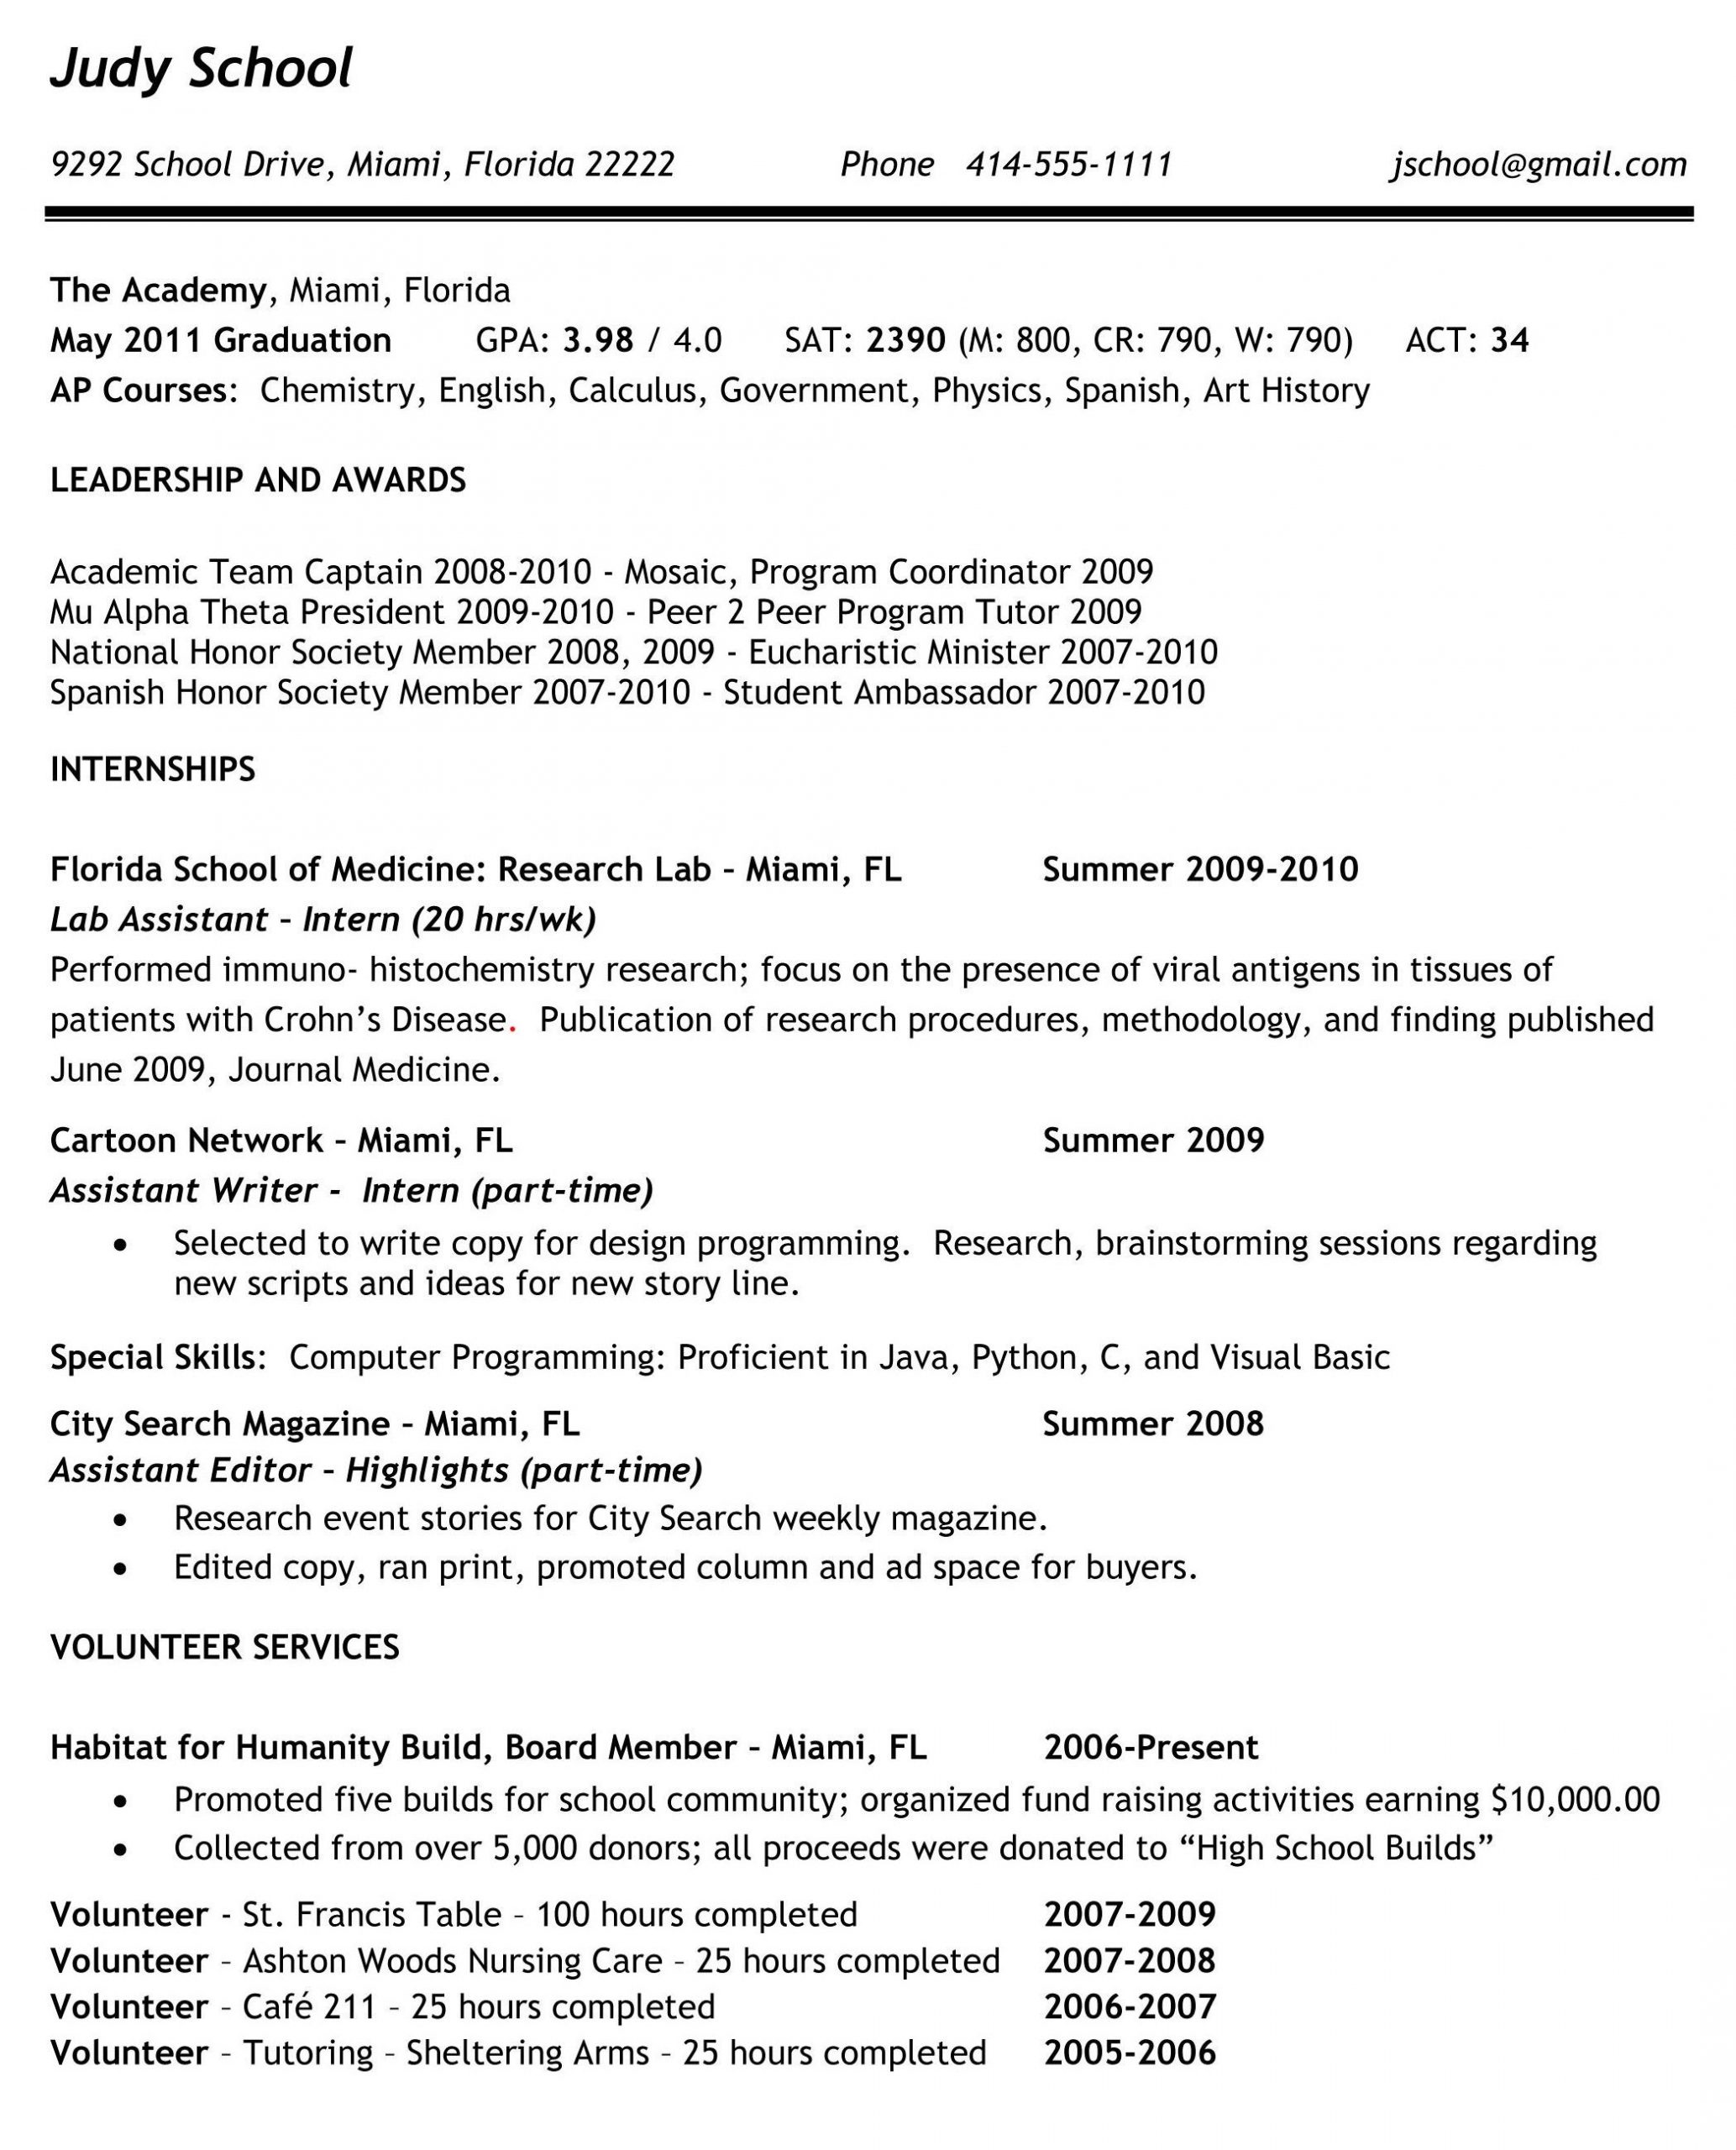 Resume Template for High School Students Applying for College High School Resume Examples for College Admission Sample Resumes …